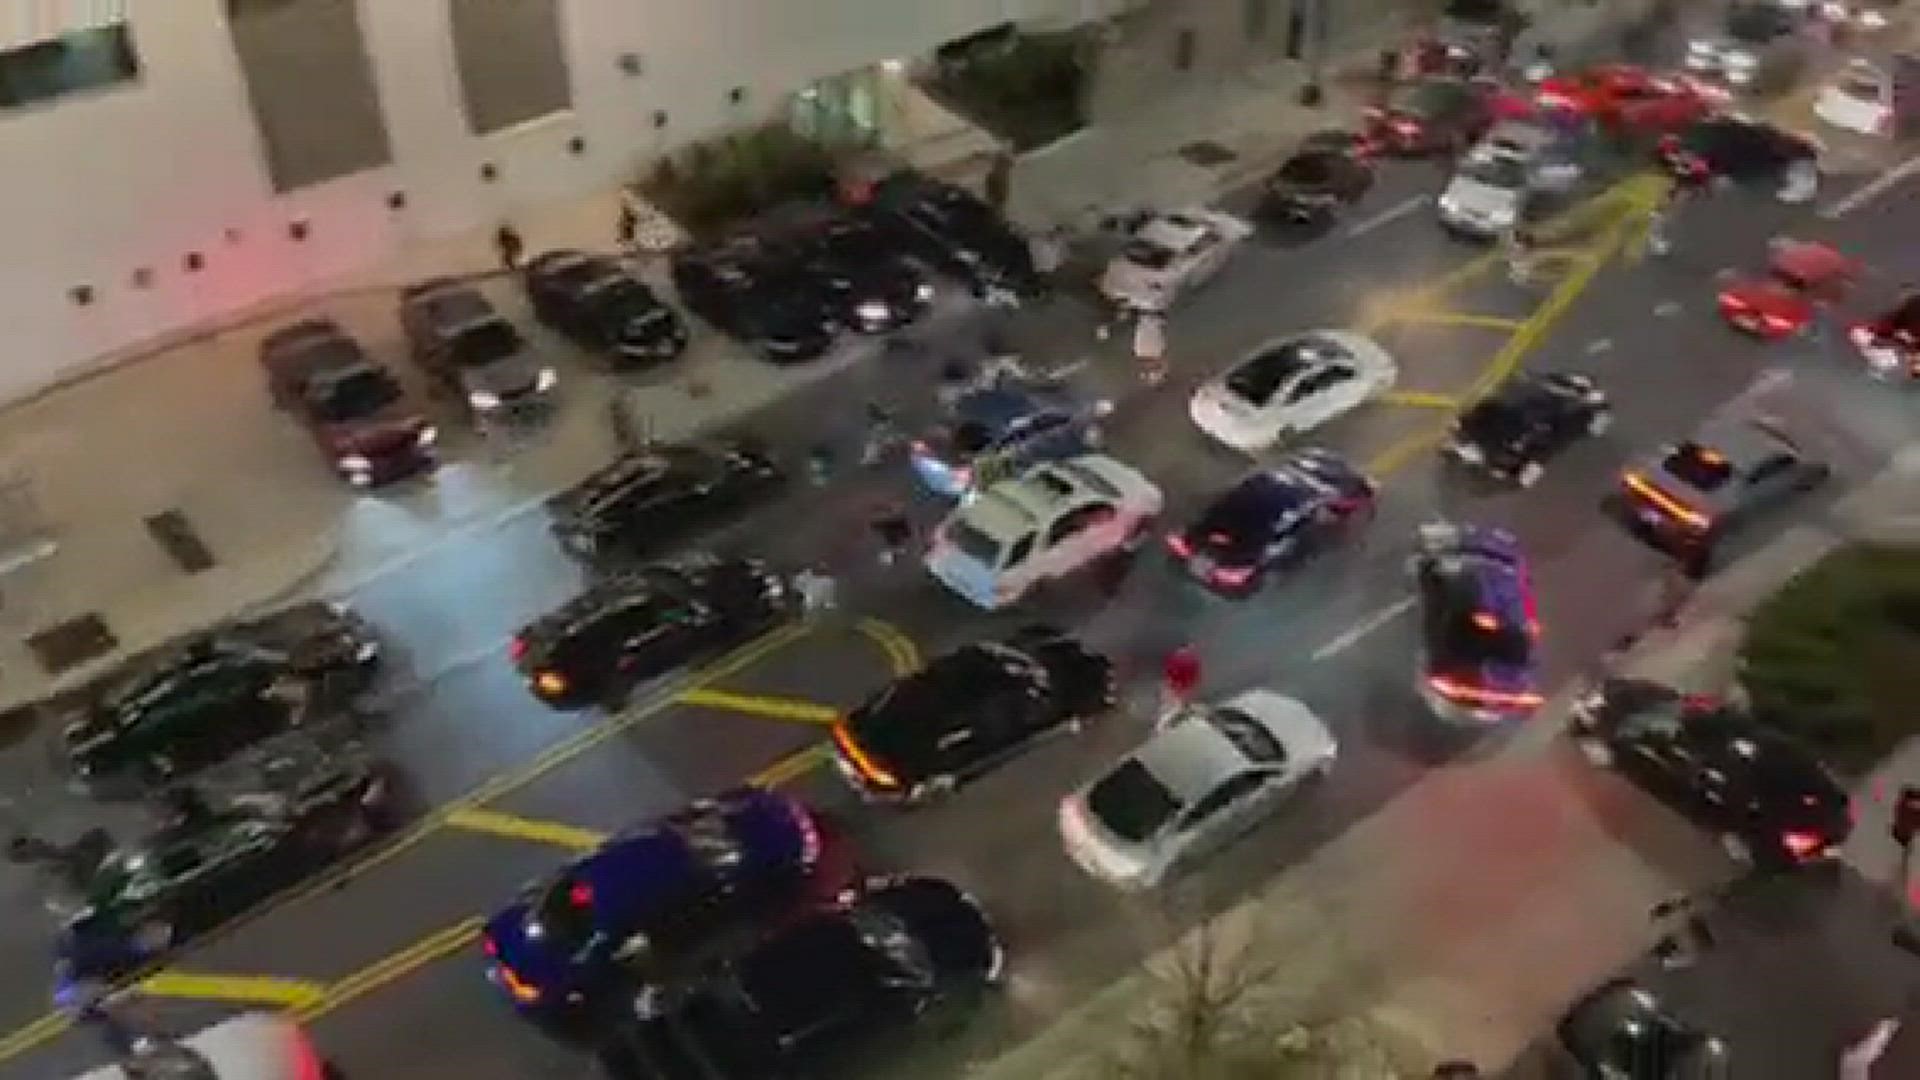 People disperse from the situation as word gets out that police are coming.
Credit: WCNC viewer